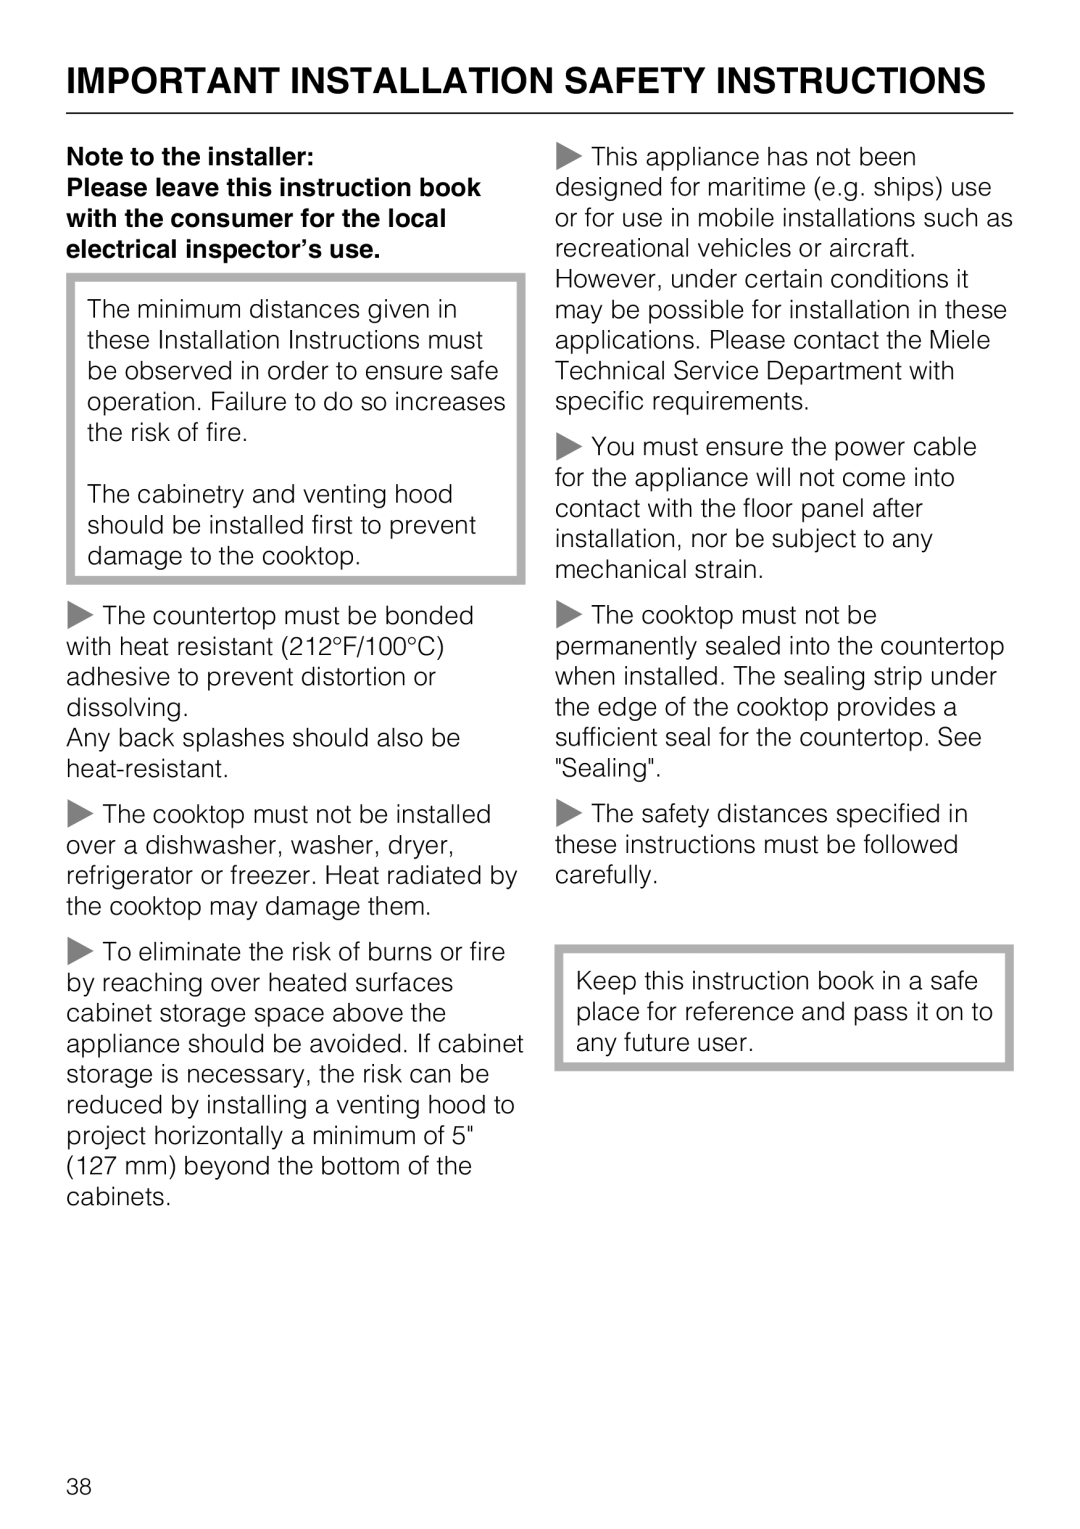 Miele KM 5820 installation instructions Important Installation Safety Instructions, Note to the installer 